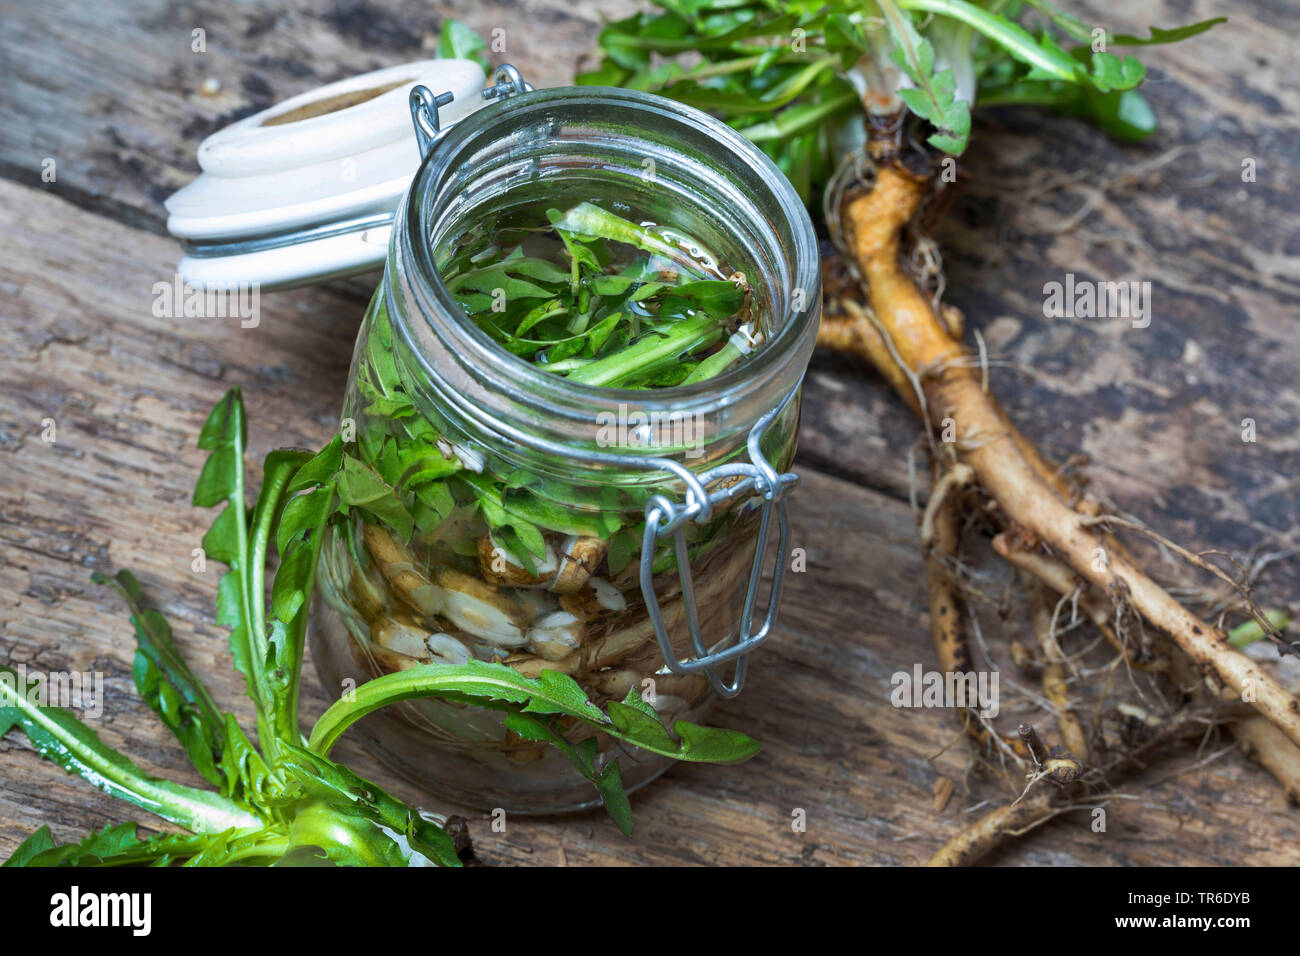 common dandelion (Taraxacum officinale), selfmade tincture from dandelion roots, Germany Stock Photo